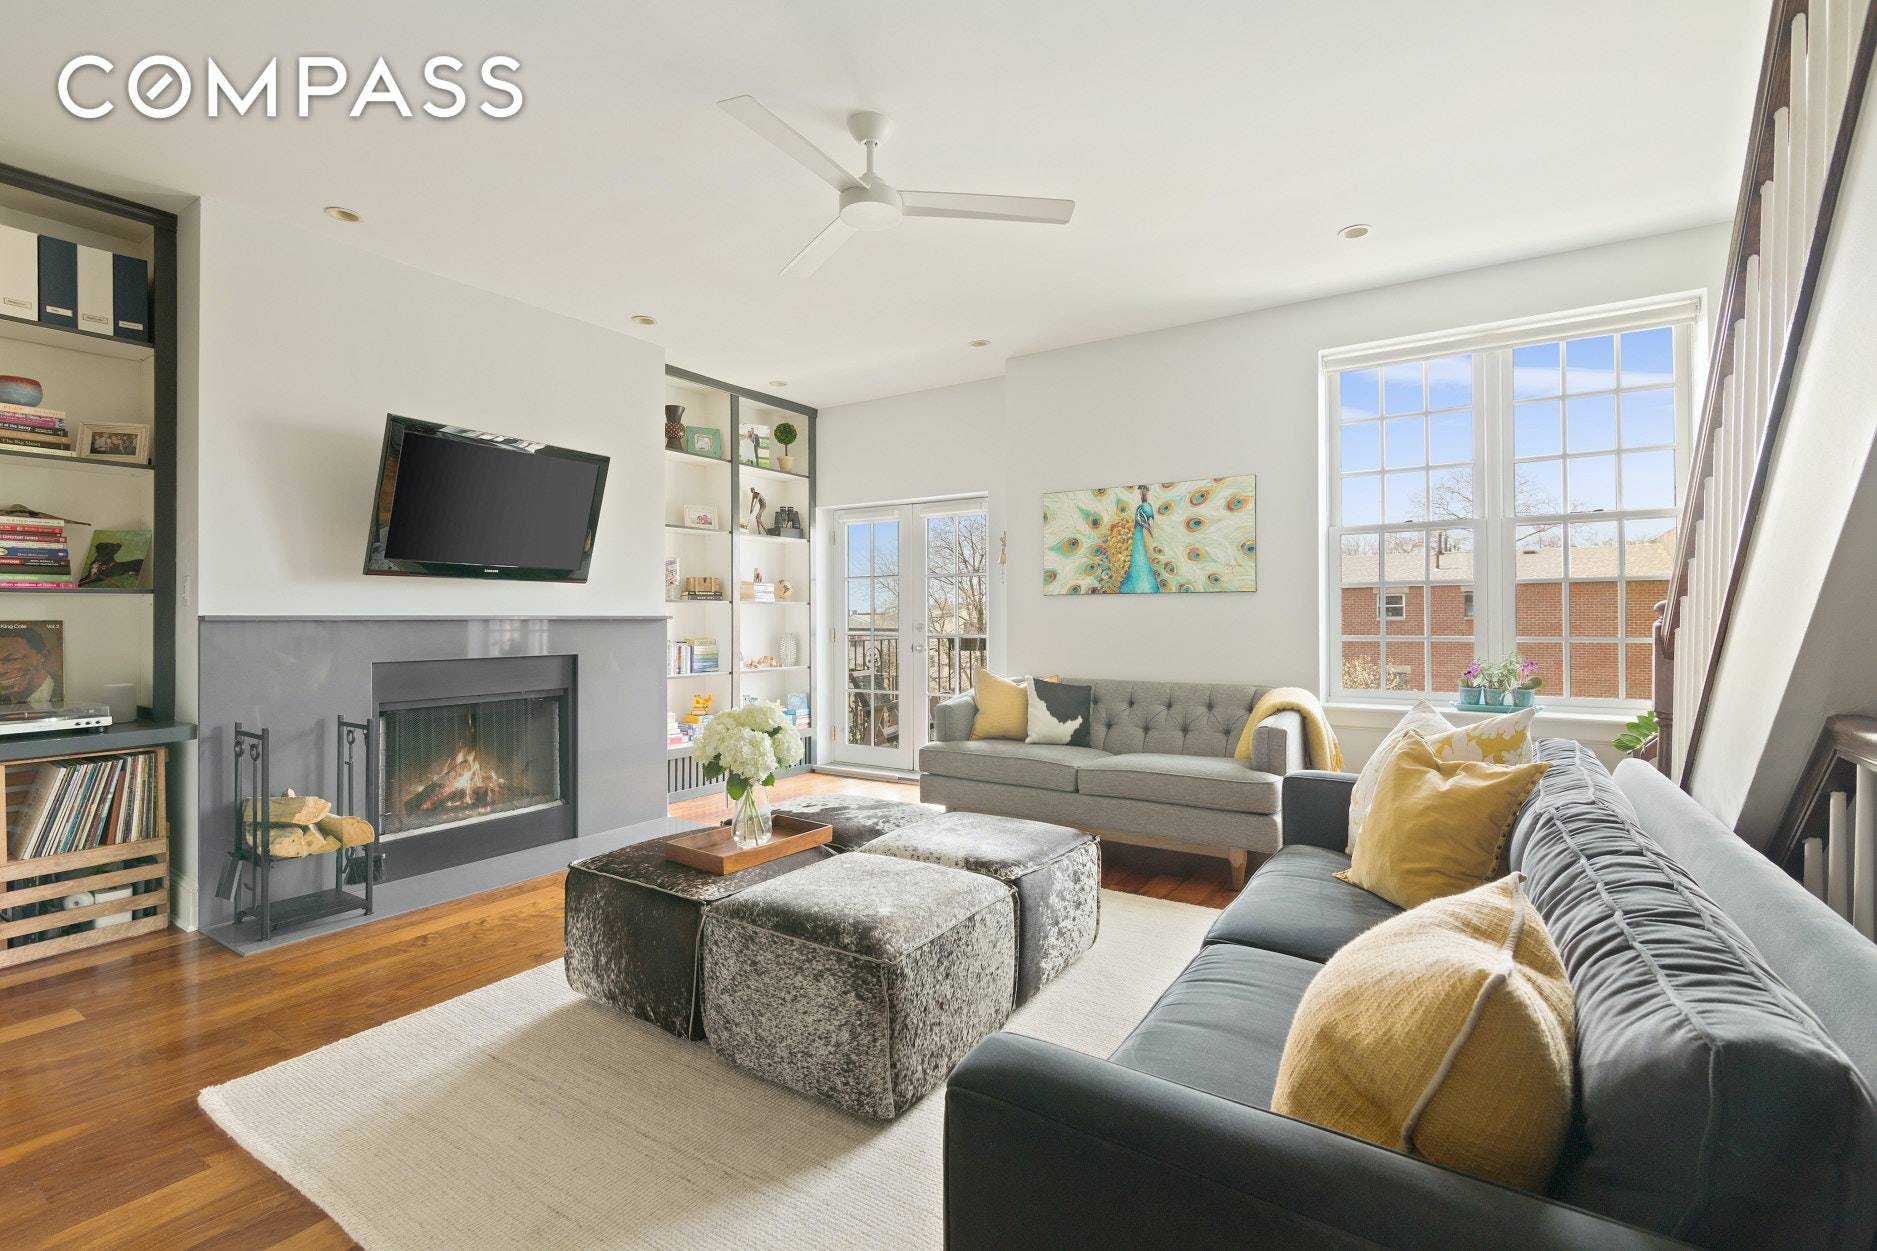 Welcome home to this open, airy and sun drenched two bedroom, two bath penthouse condominium in Windsor Terrace, one of Brooklyn's most sought after and friendly neighborhoods.